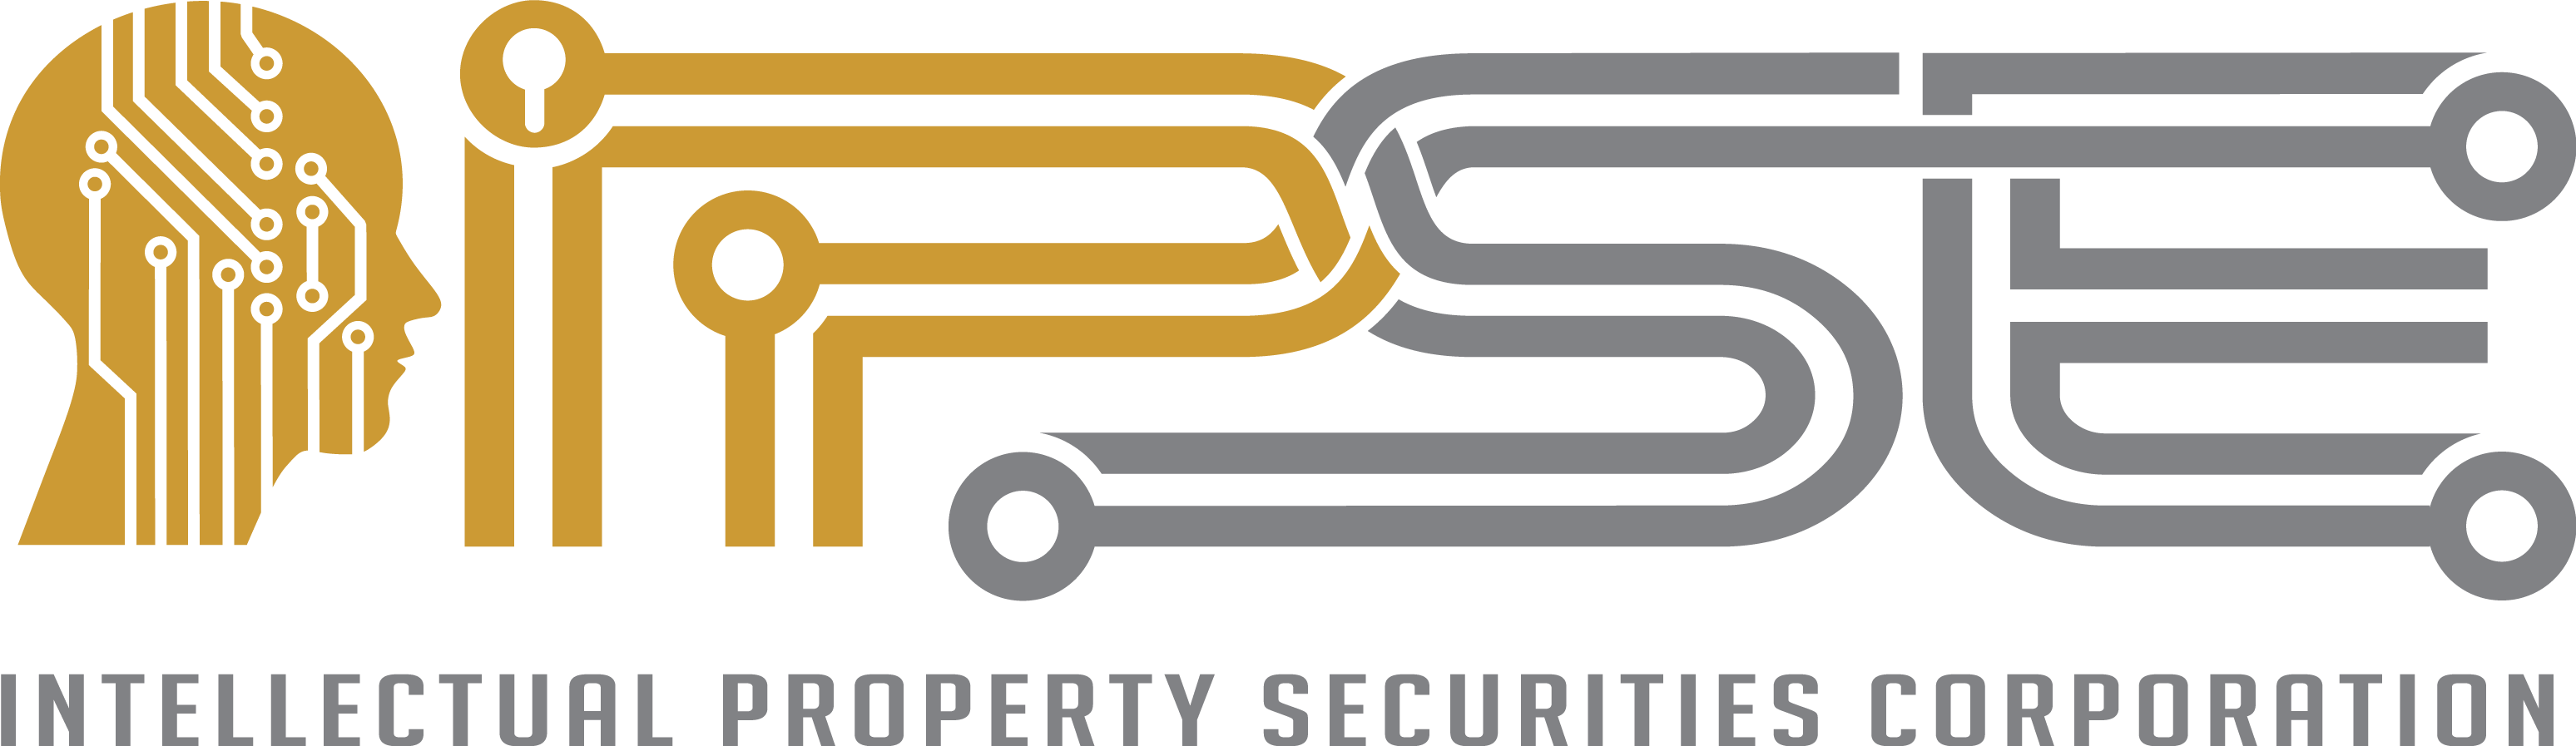 Intellectual Property Securities